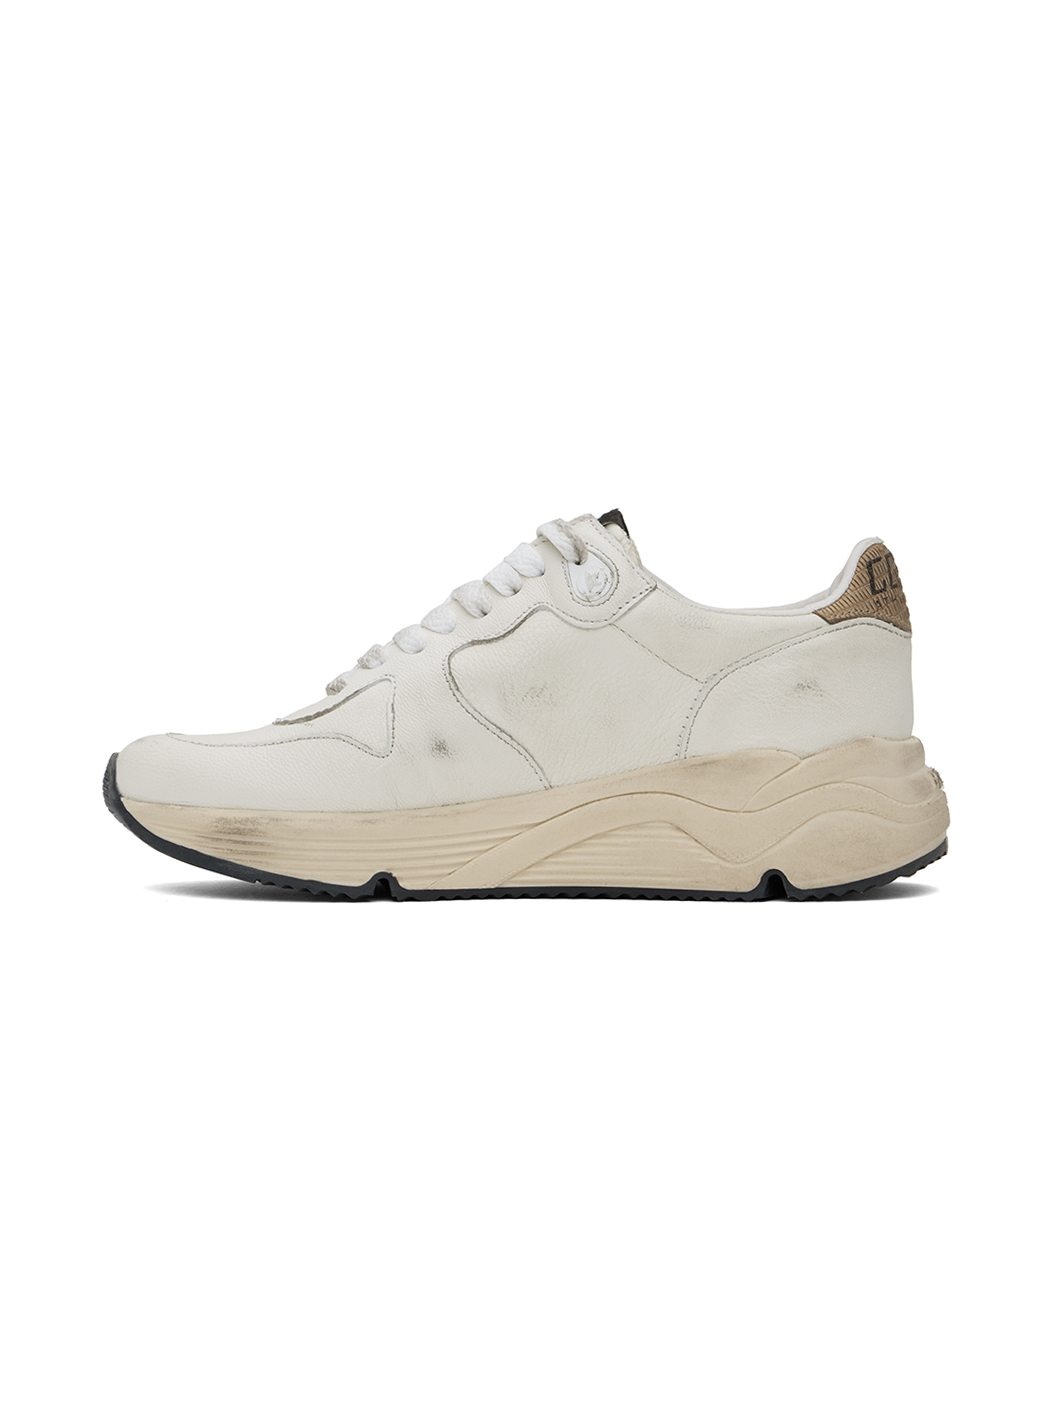 Off-White & Beige Running Sole Sneakers - 3